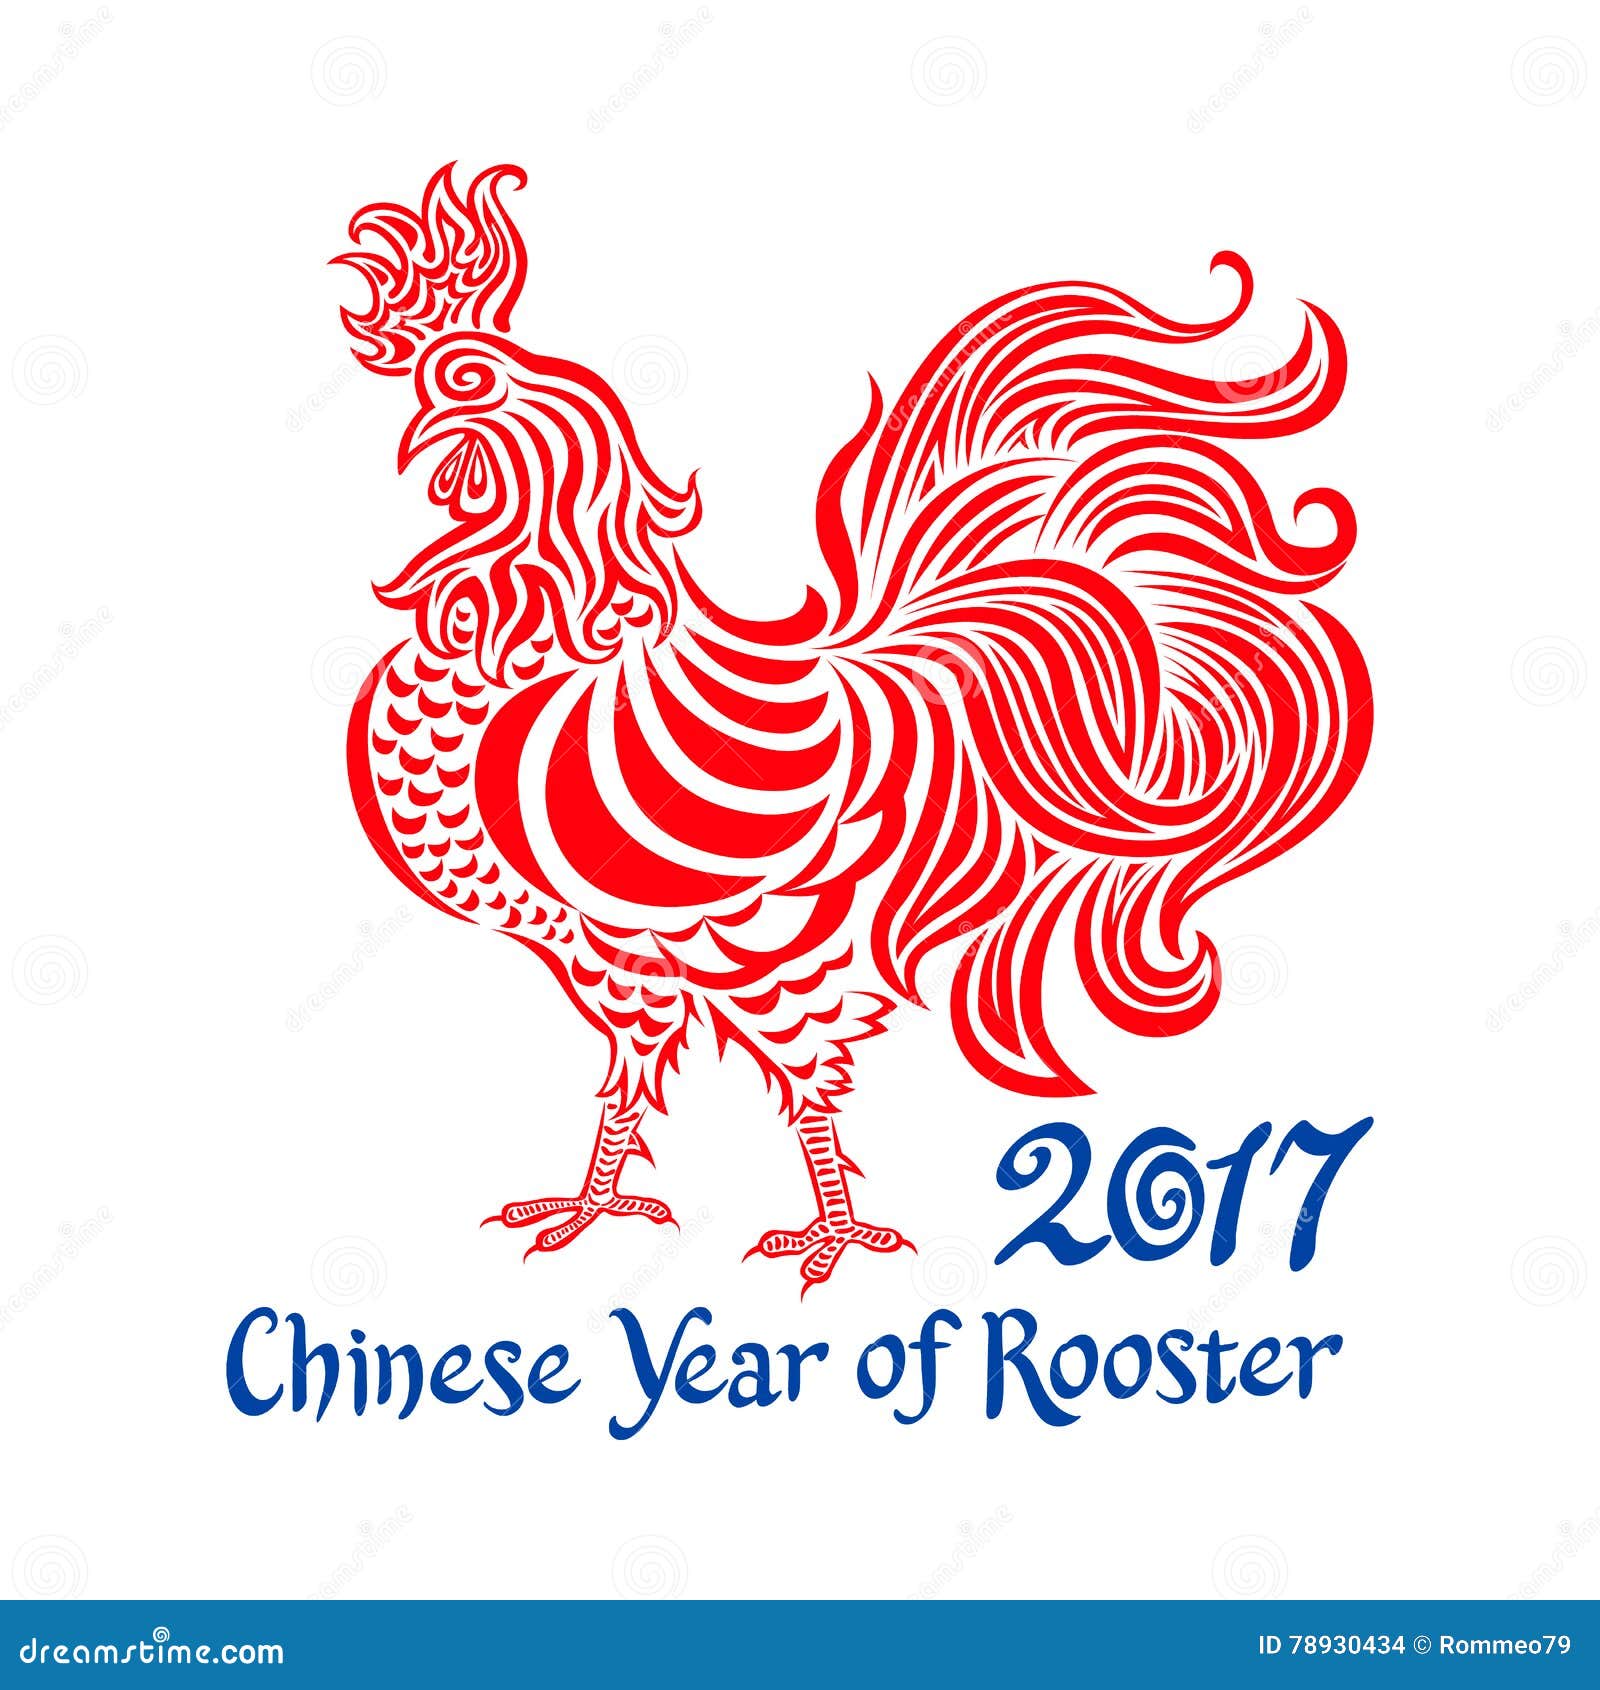 2017 Chinese Year of Rooster Vector Illustration Stock Vector ...